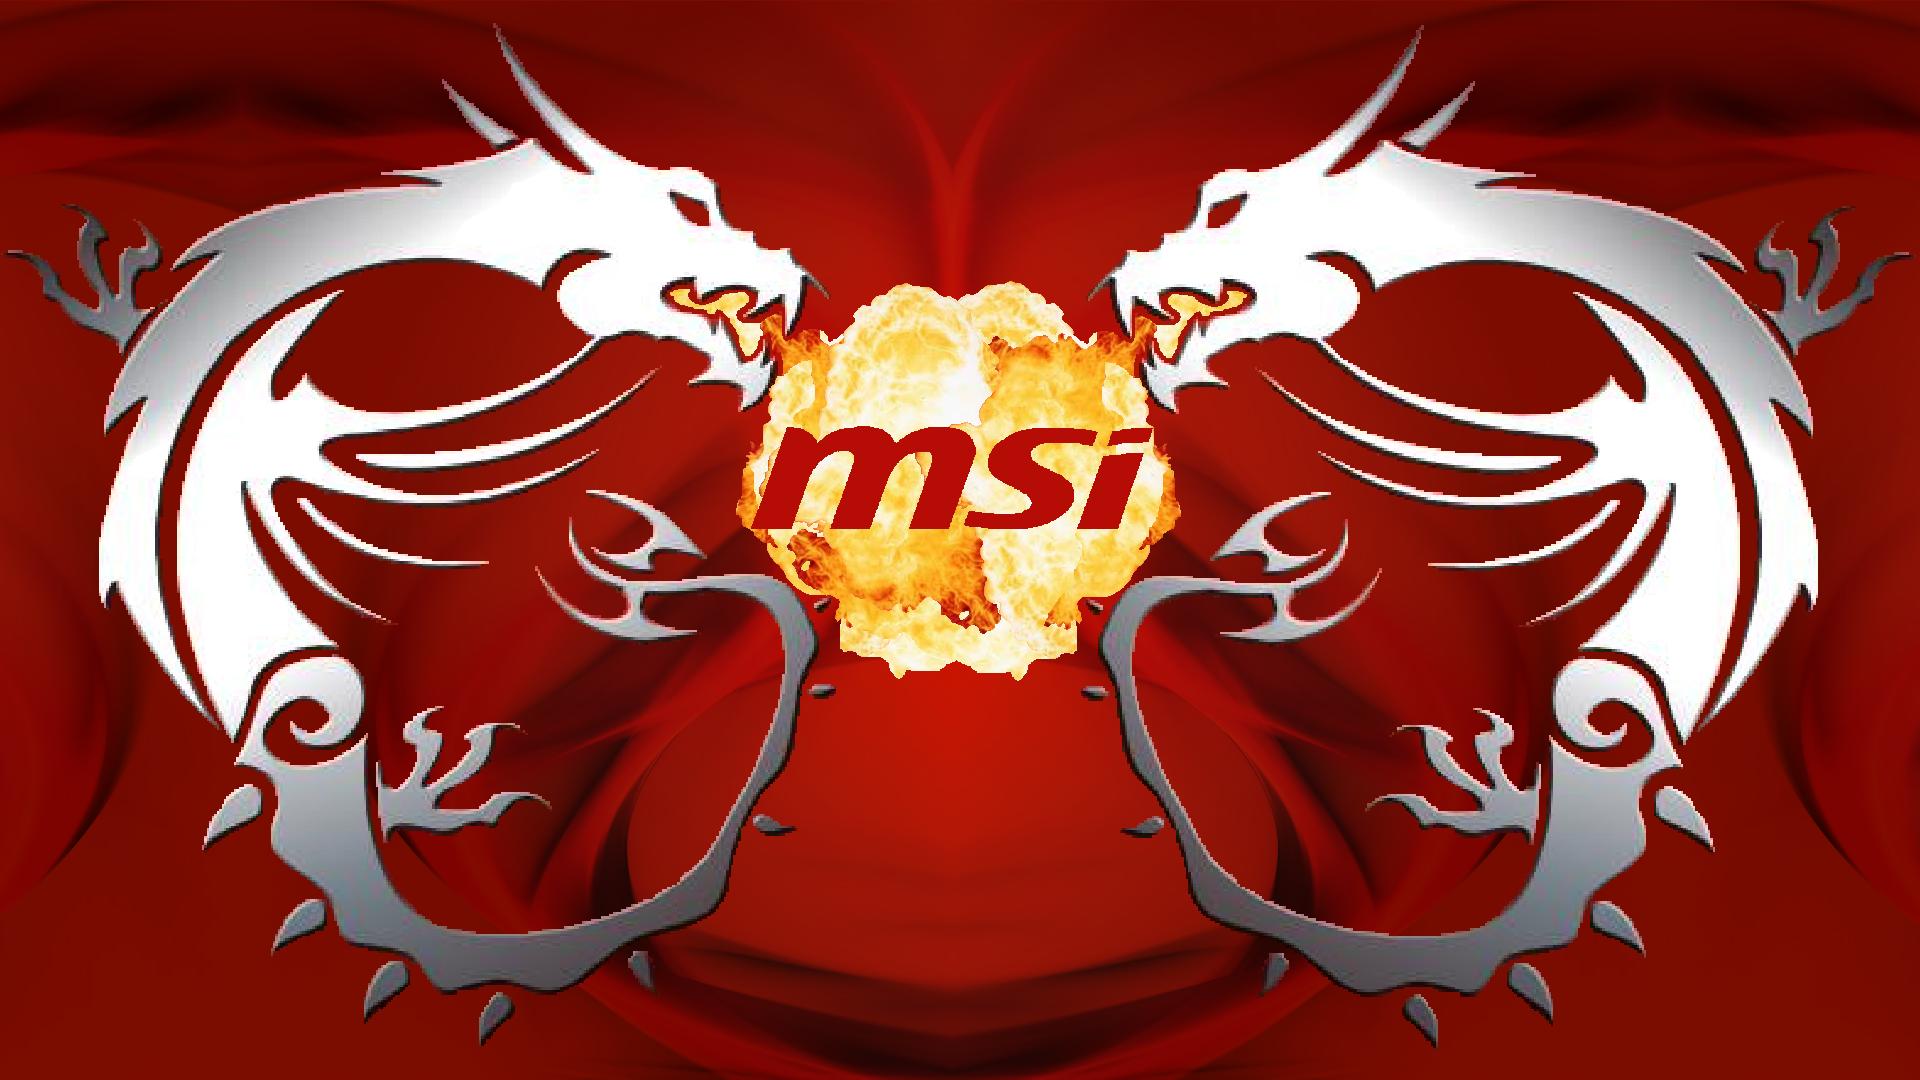 Best MSI Wallpaper Full HD Pictures